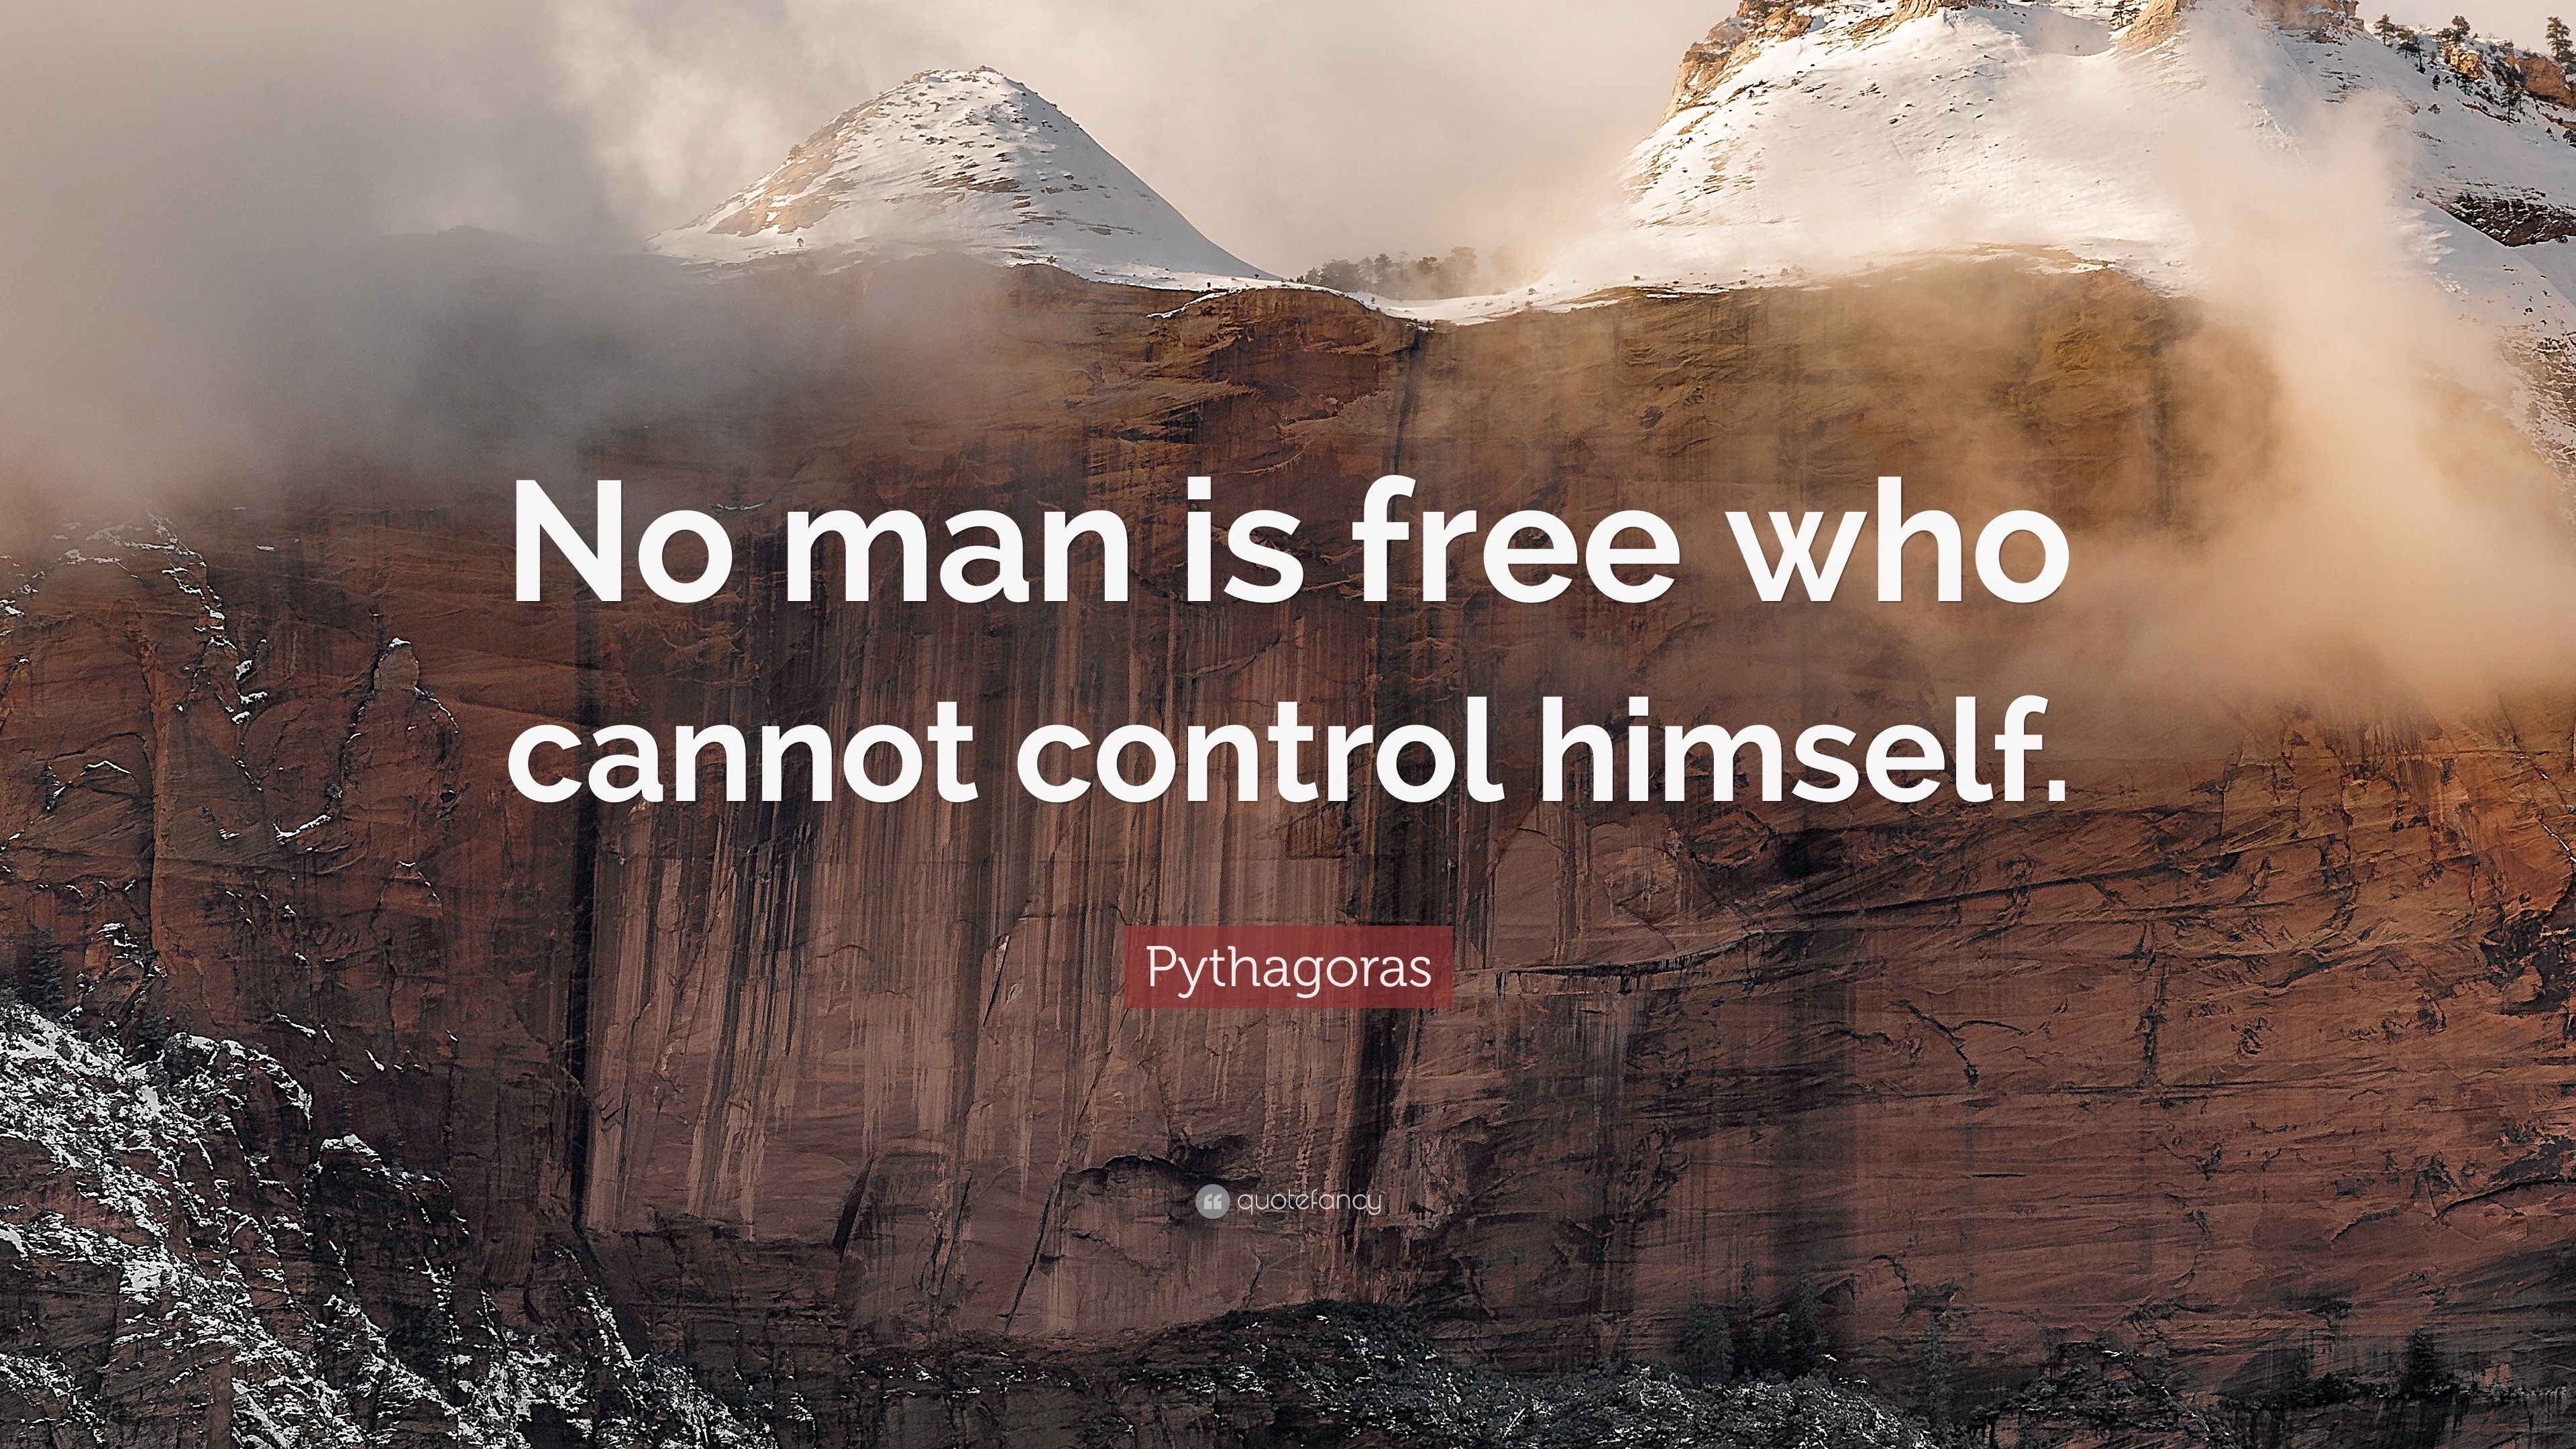 Pythagoras Quote: “No man is free who cannot control himself.” 10